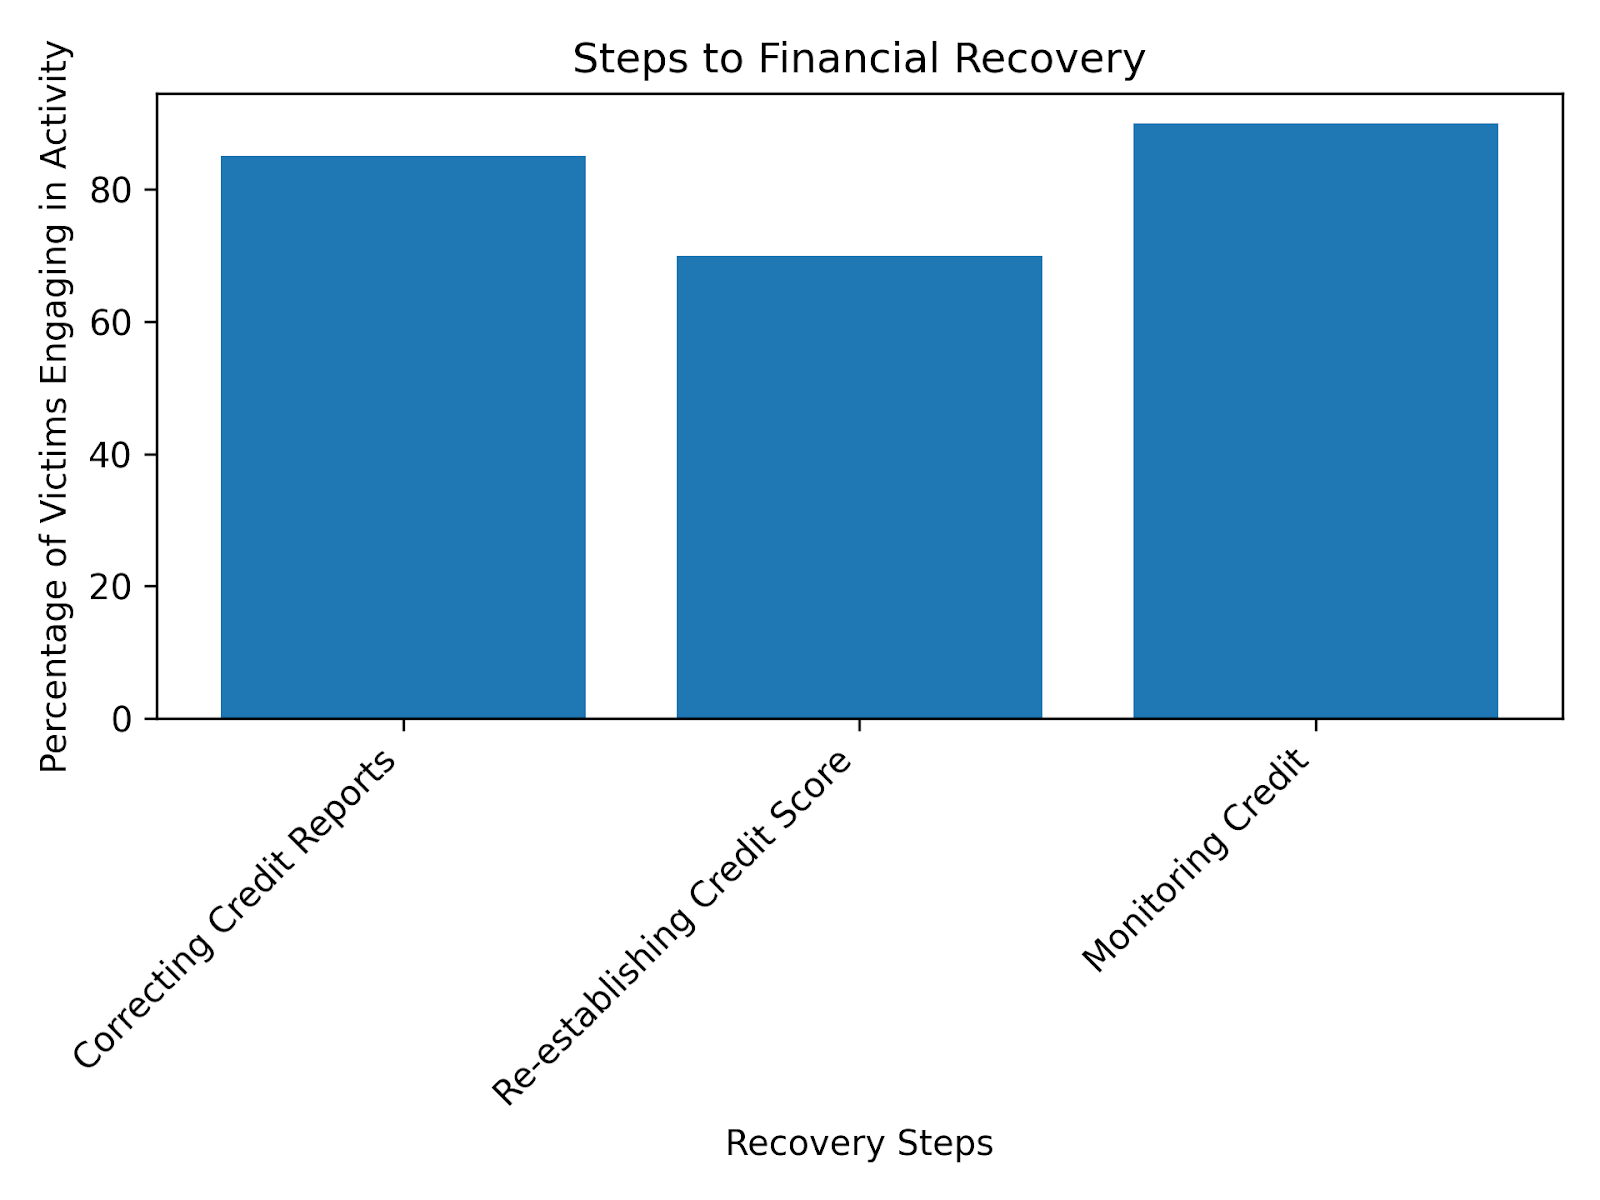 Steps to Financial Recovery